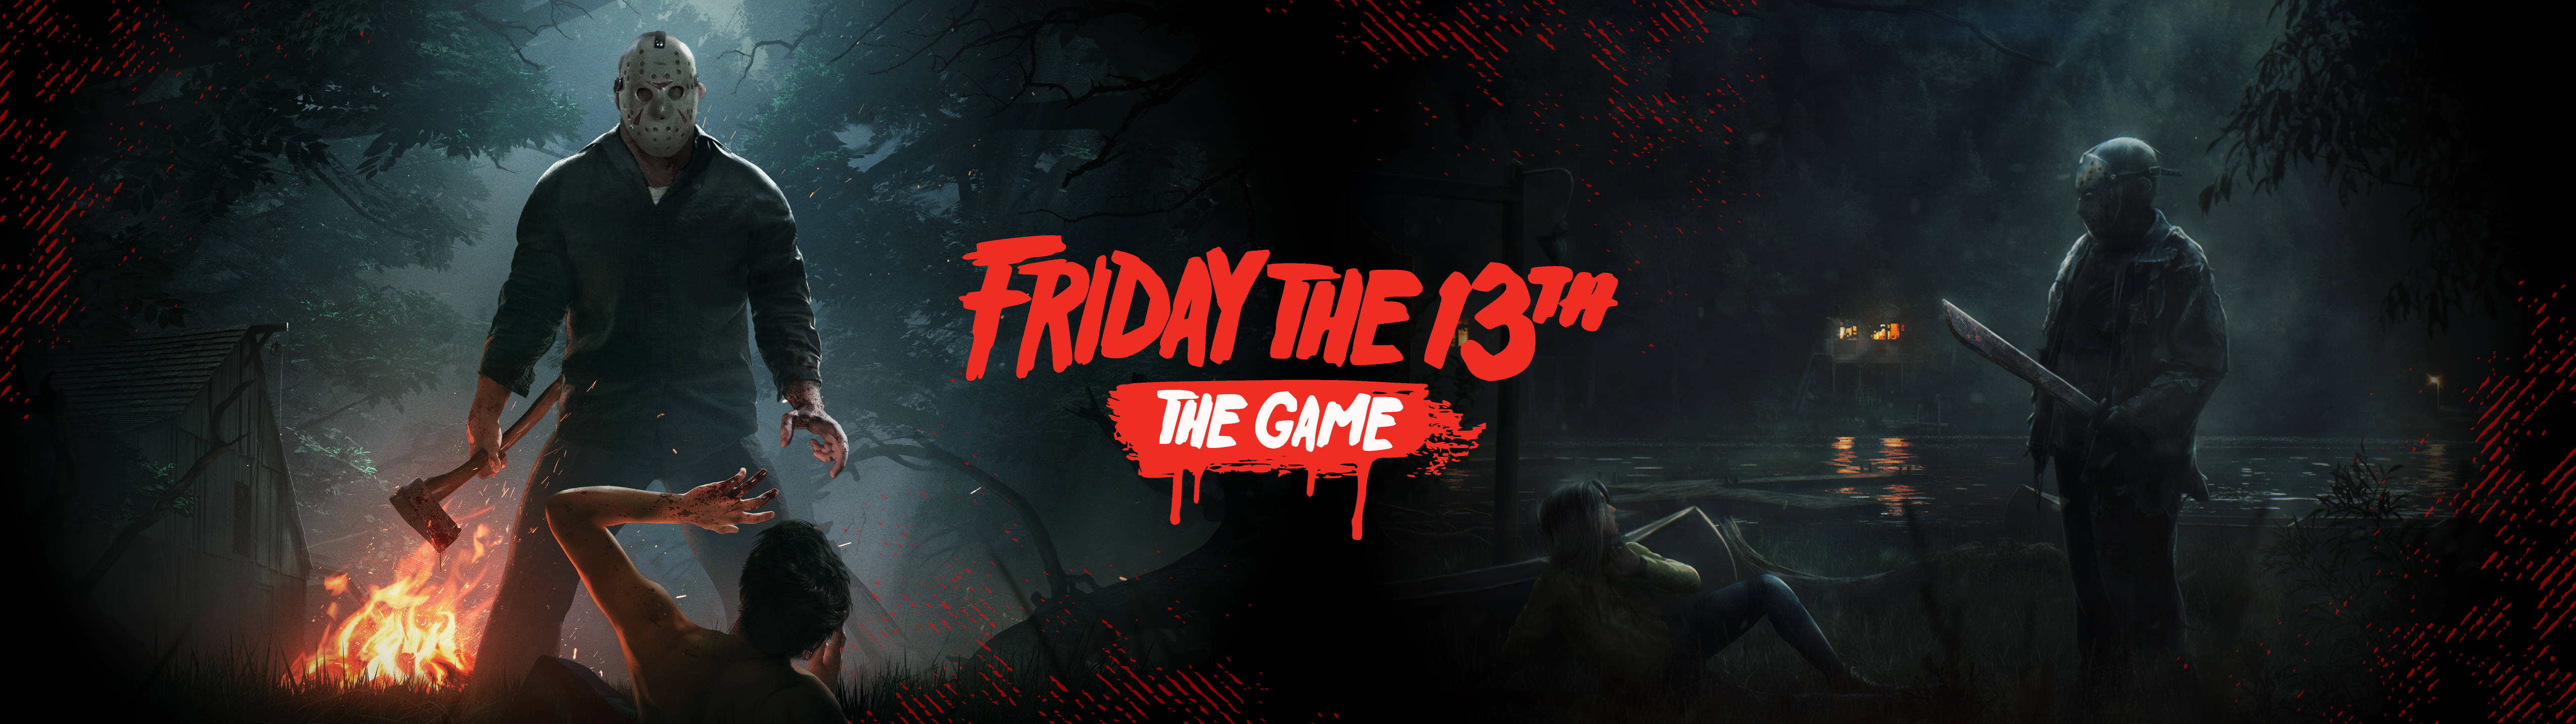 Friday The 13th 5120x1440 Gaming